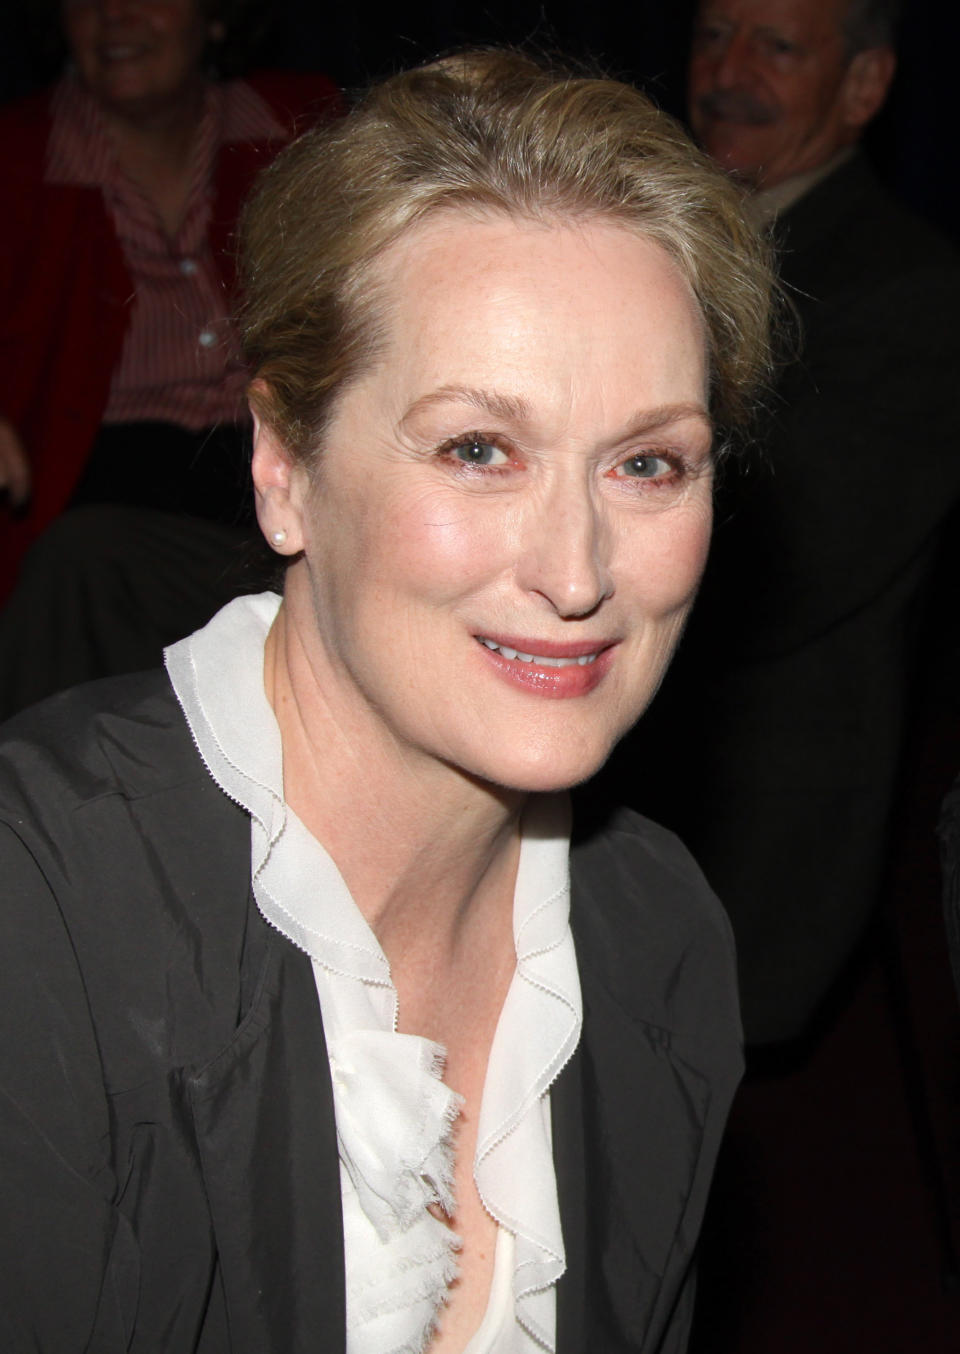 Close-up of Meryl smiling in a frilly blouse and jacket